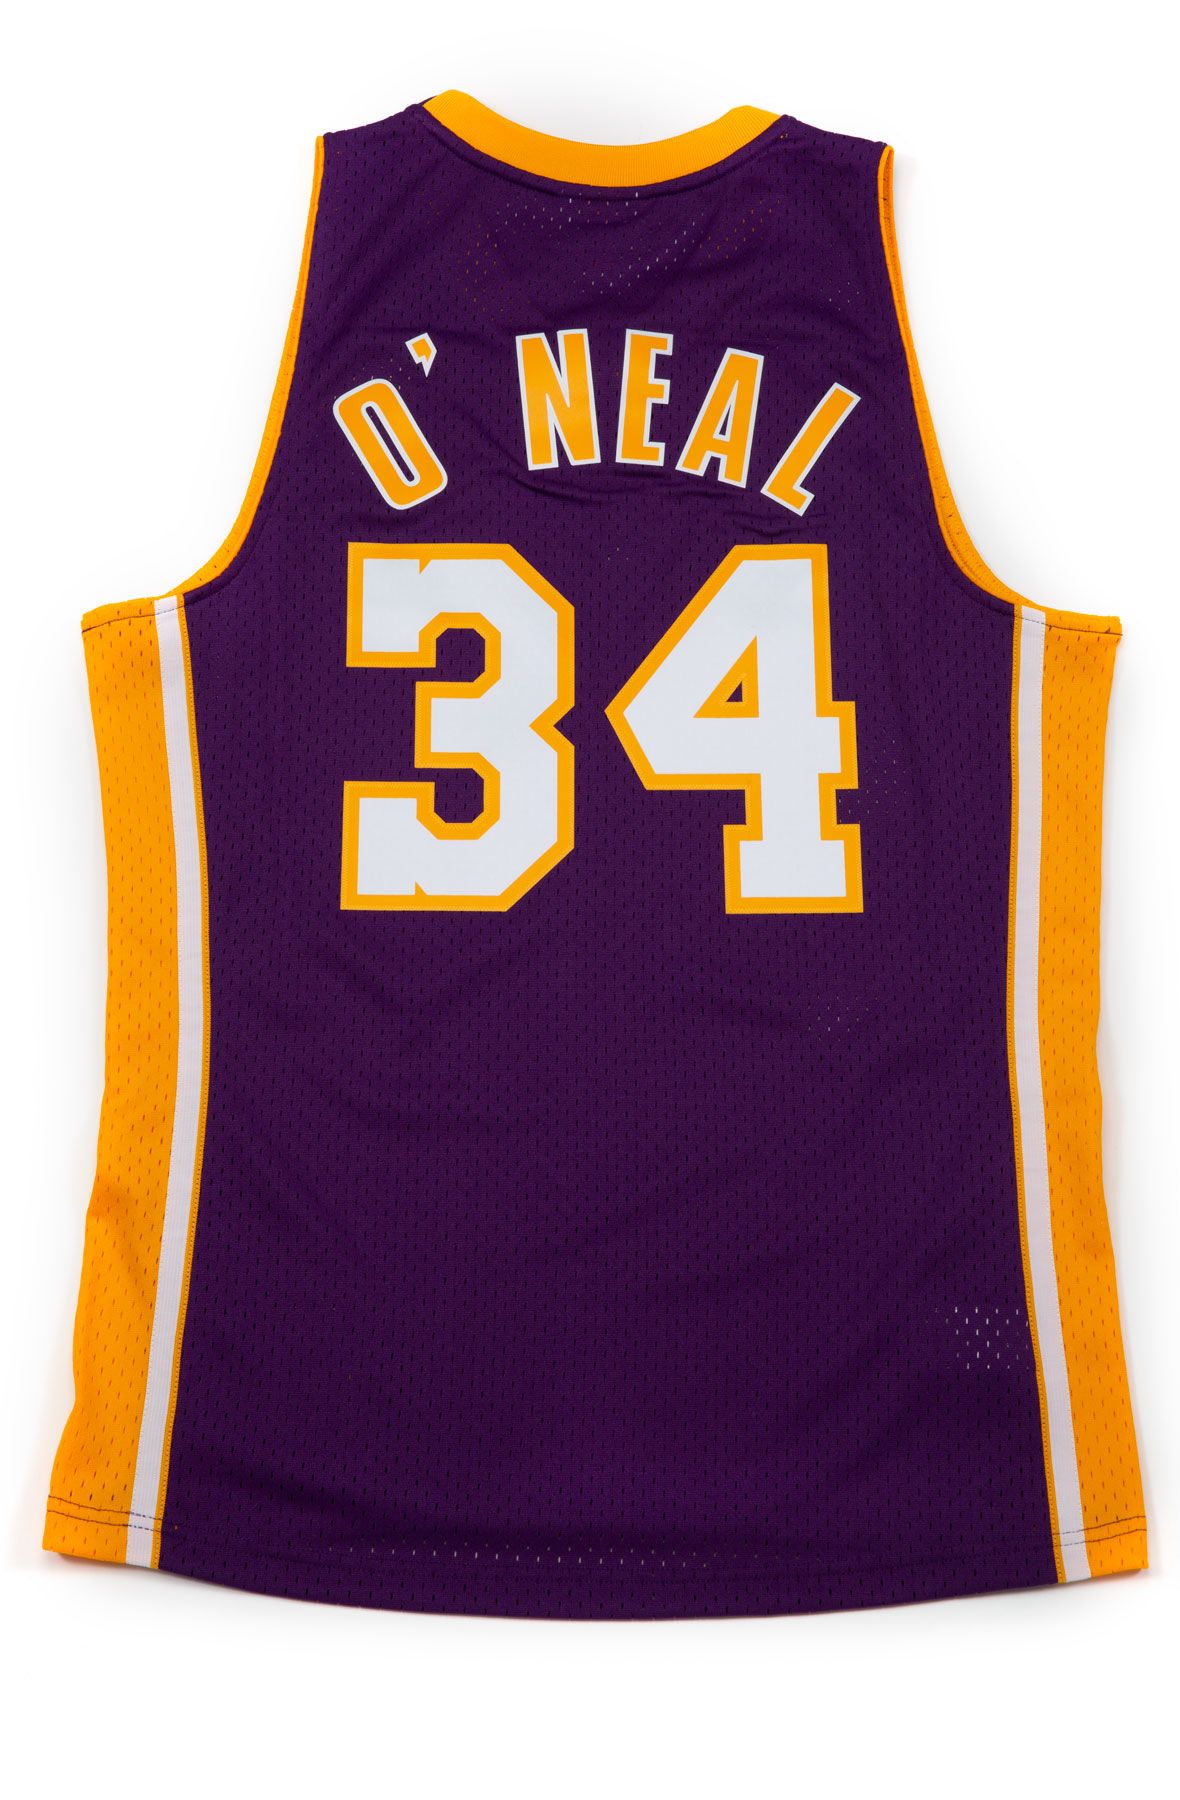 Mitchell & Ness Women's Swingman Shaquille O'Neal Los Angeles Lakers 1999-00 Jersey